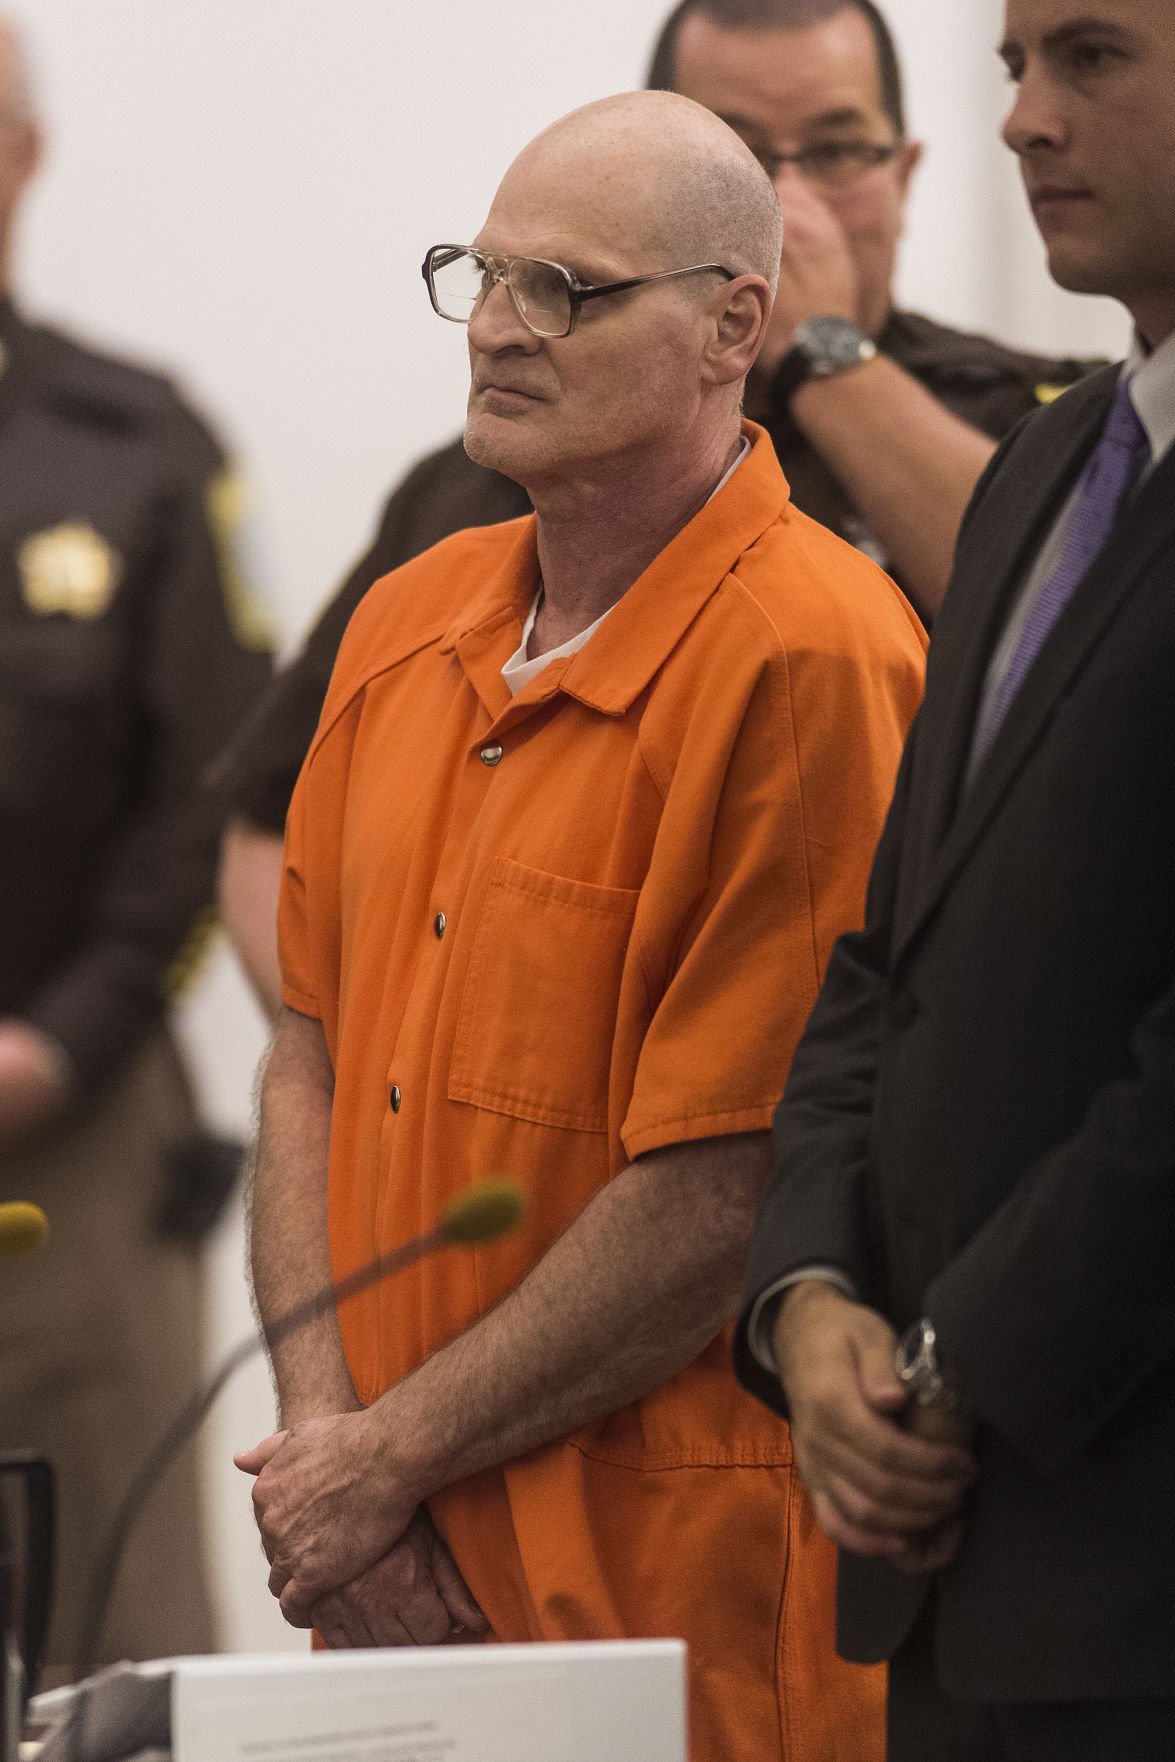 Update: Welch to serve 48 years after guilty plea in Lyon sisters case